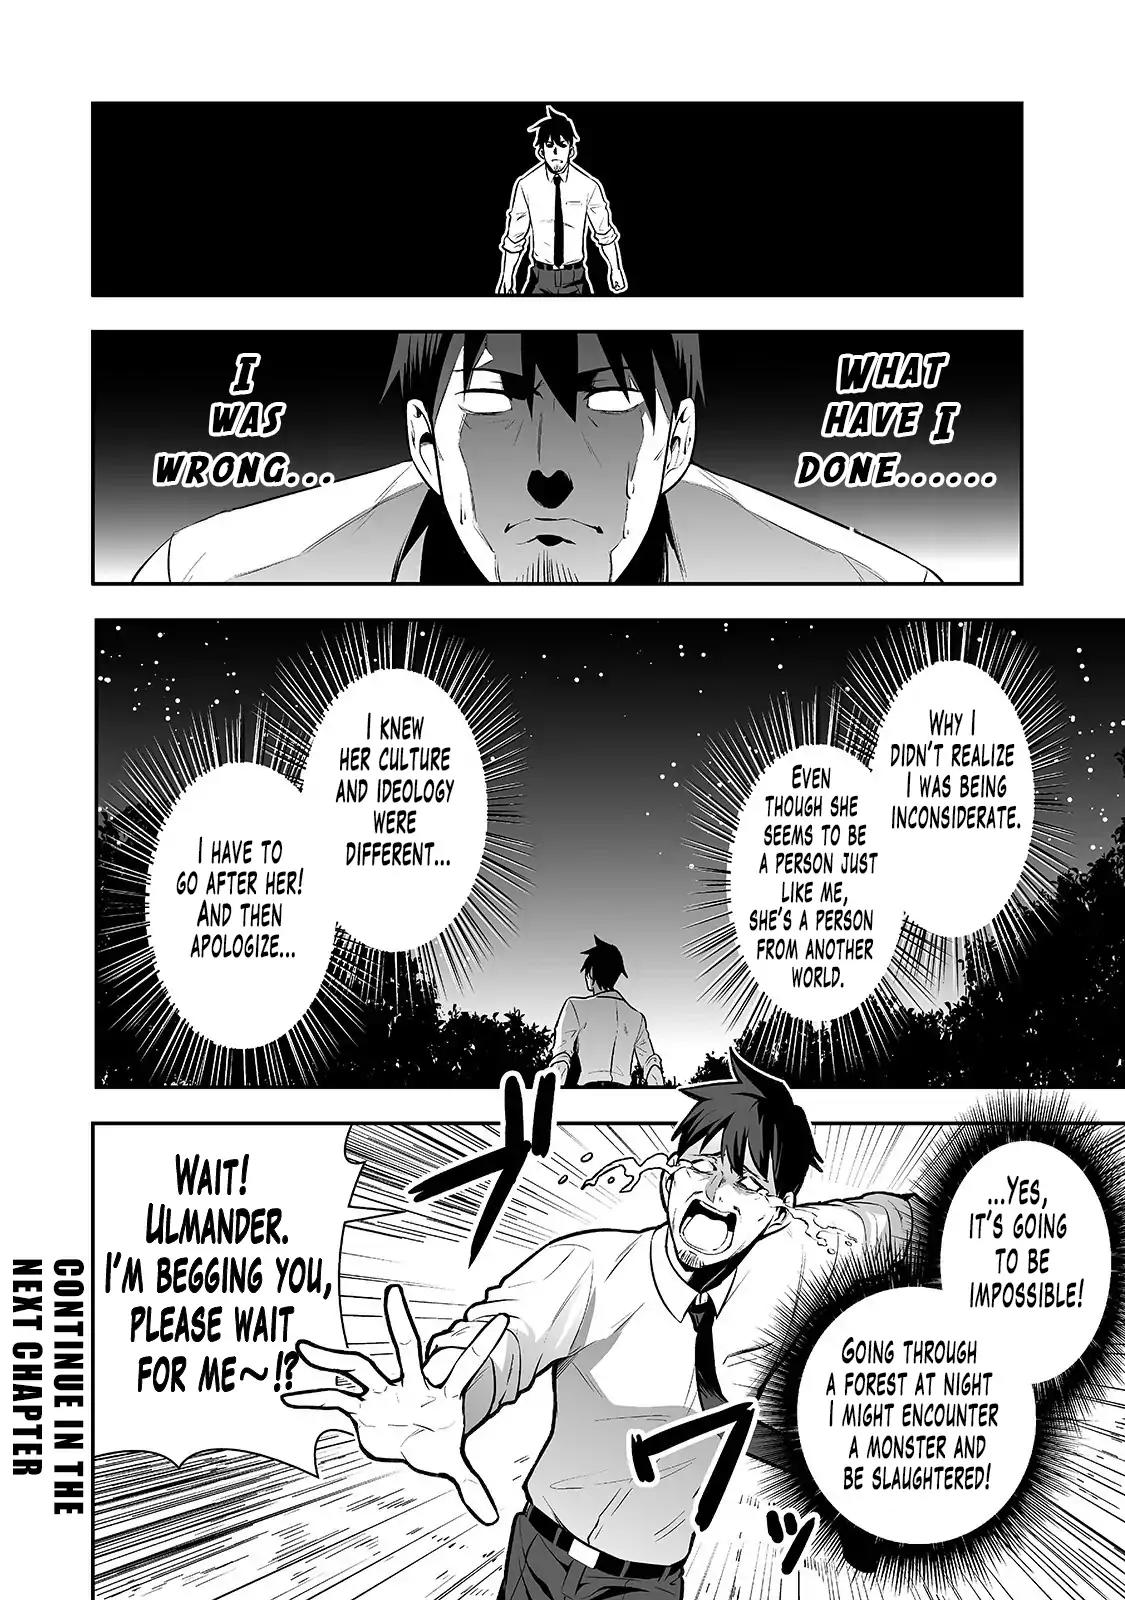 Story About a Salaryman Who Became One of the Four Heavenly Kings When He Went to Another World Vol.1 Chapter 7